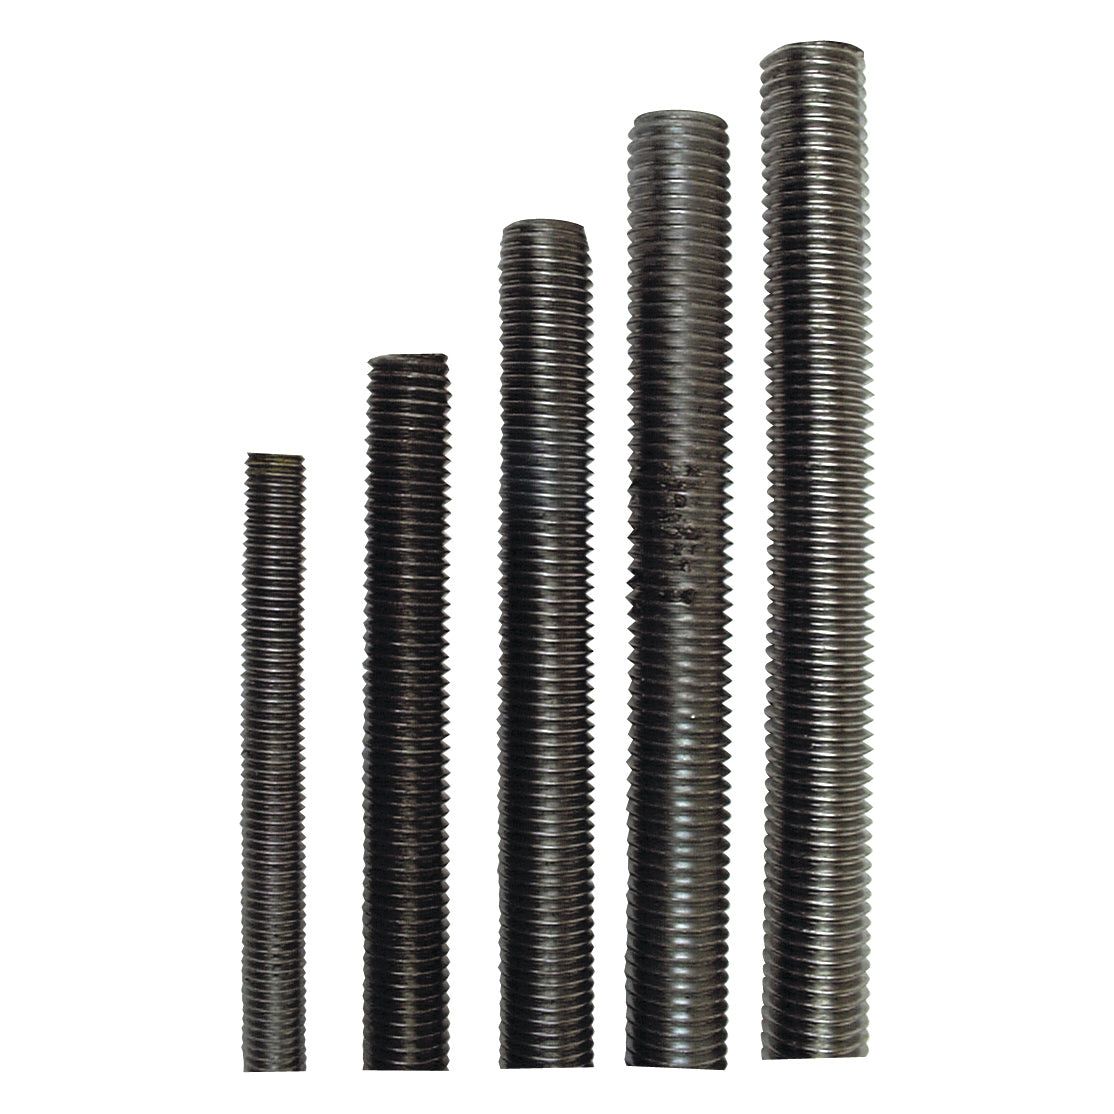 Metric Threaded Bar, Size:⌀20mm, Length: 1M, Tensile strength: 4.6.
 - S.8323 - Farming Parts